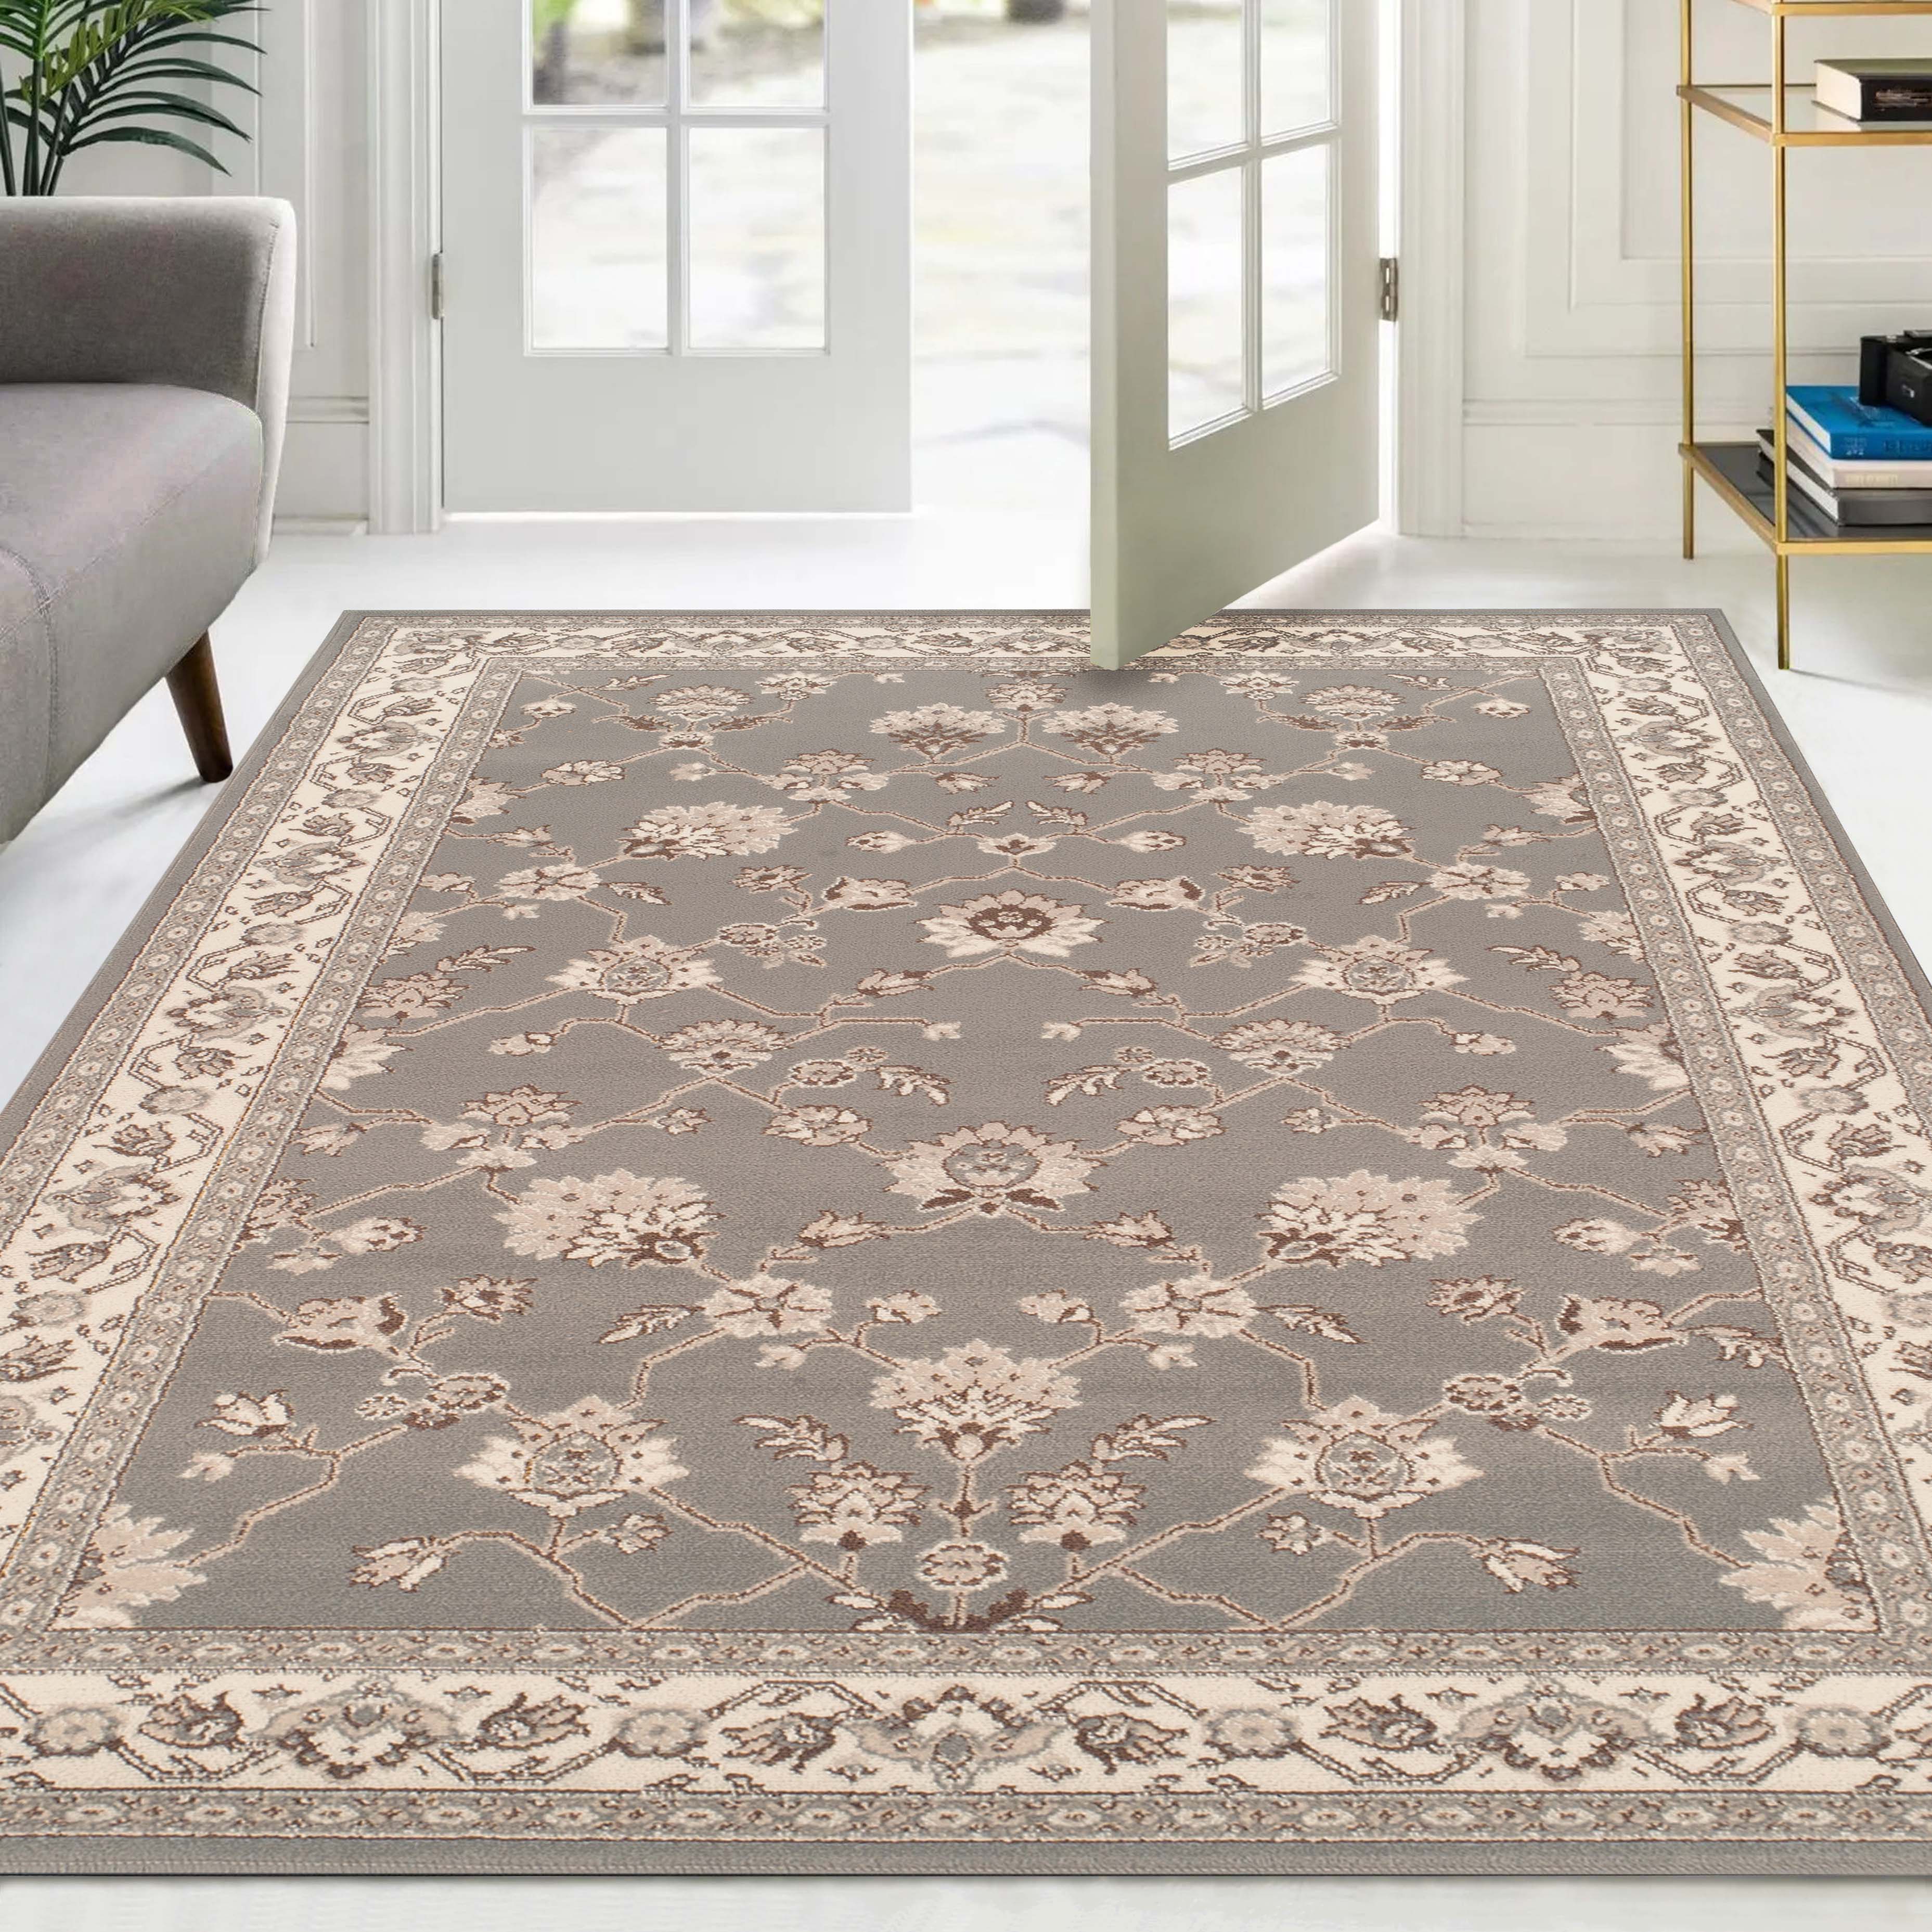 Kingfield Designer Area Rug Collection - image 1 of 5